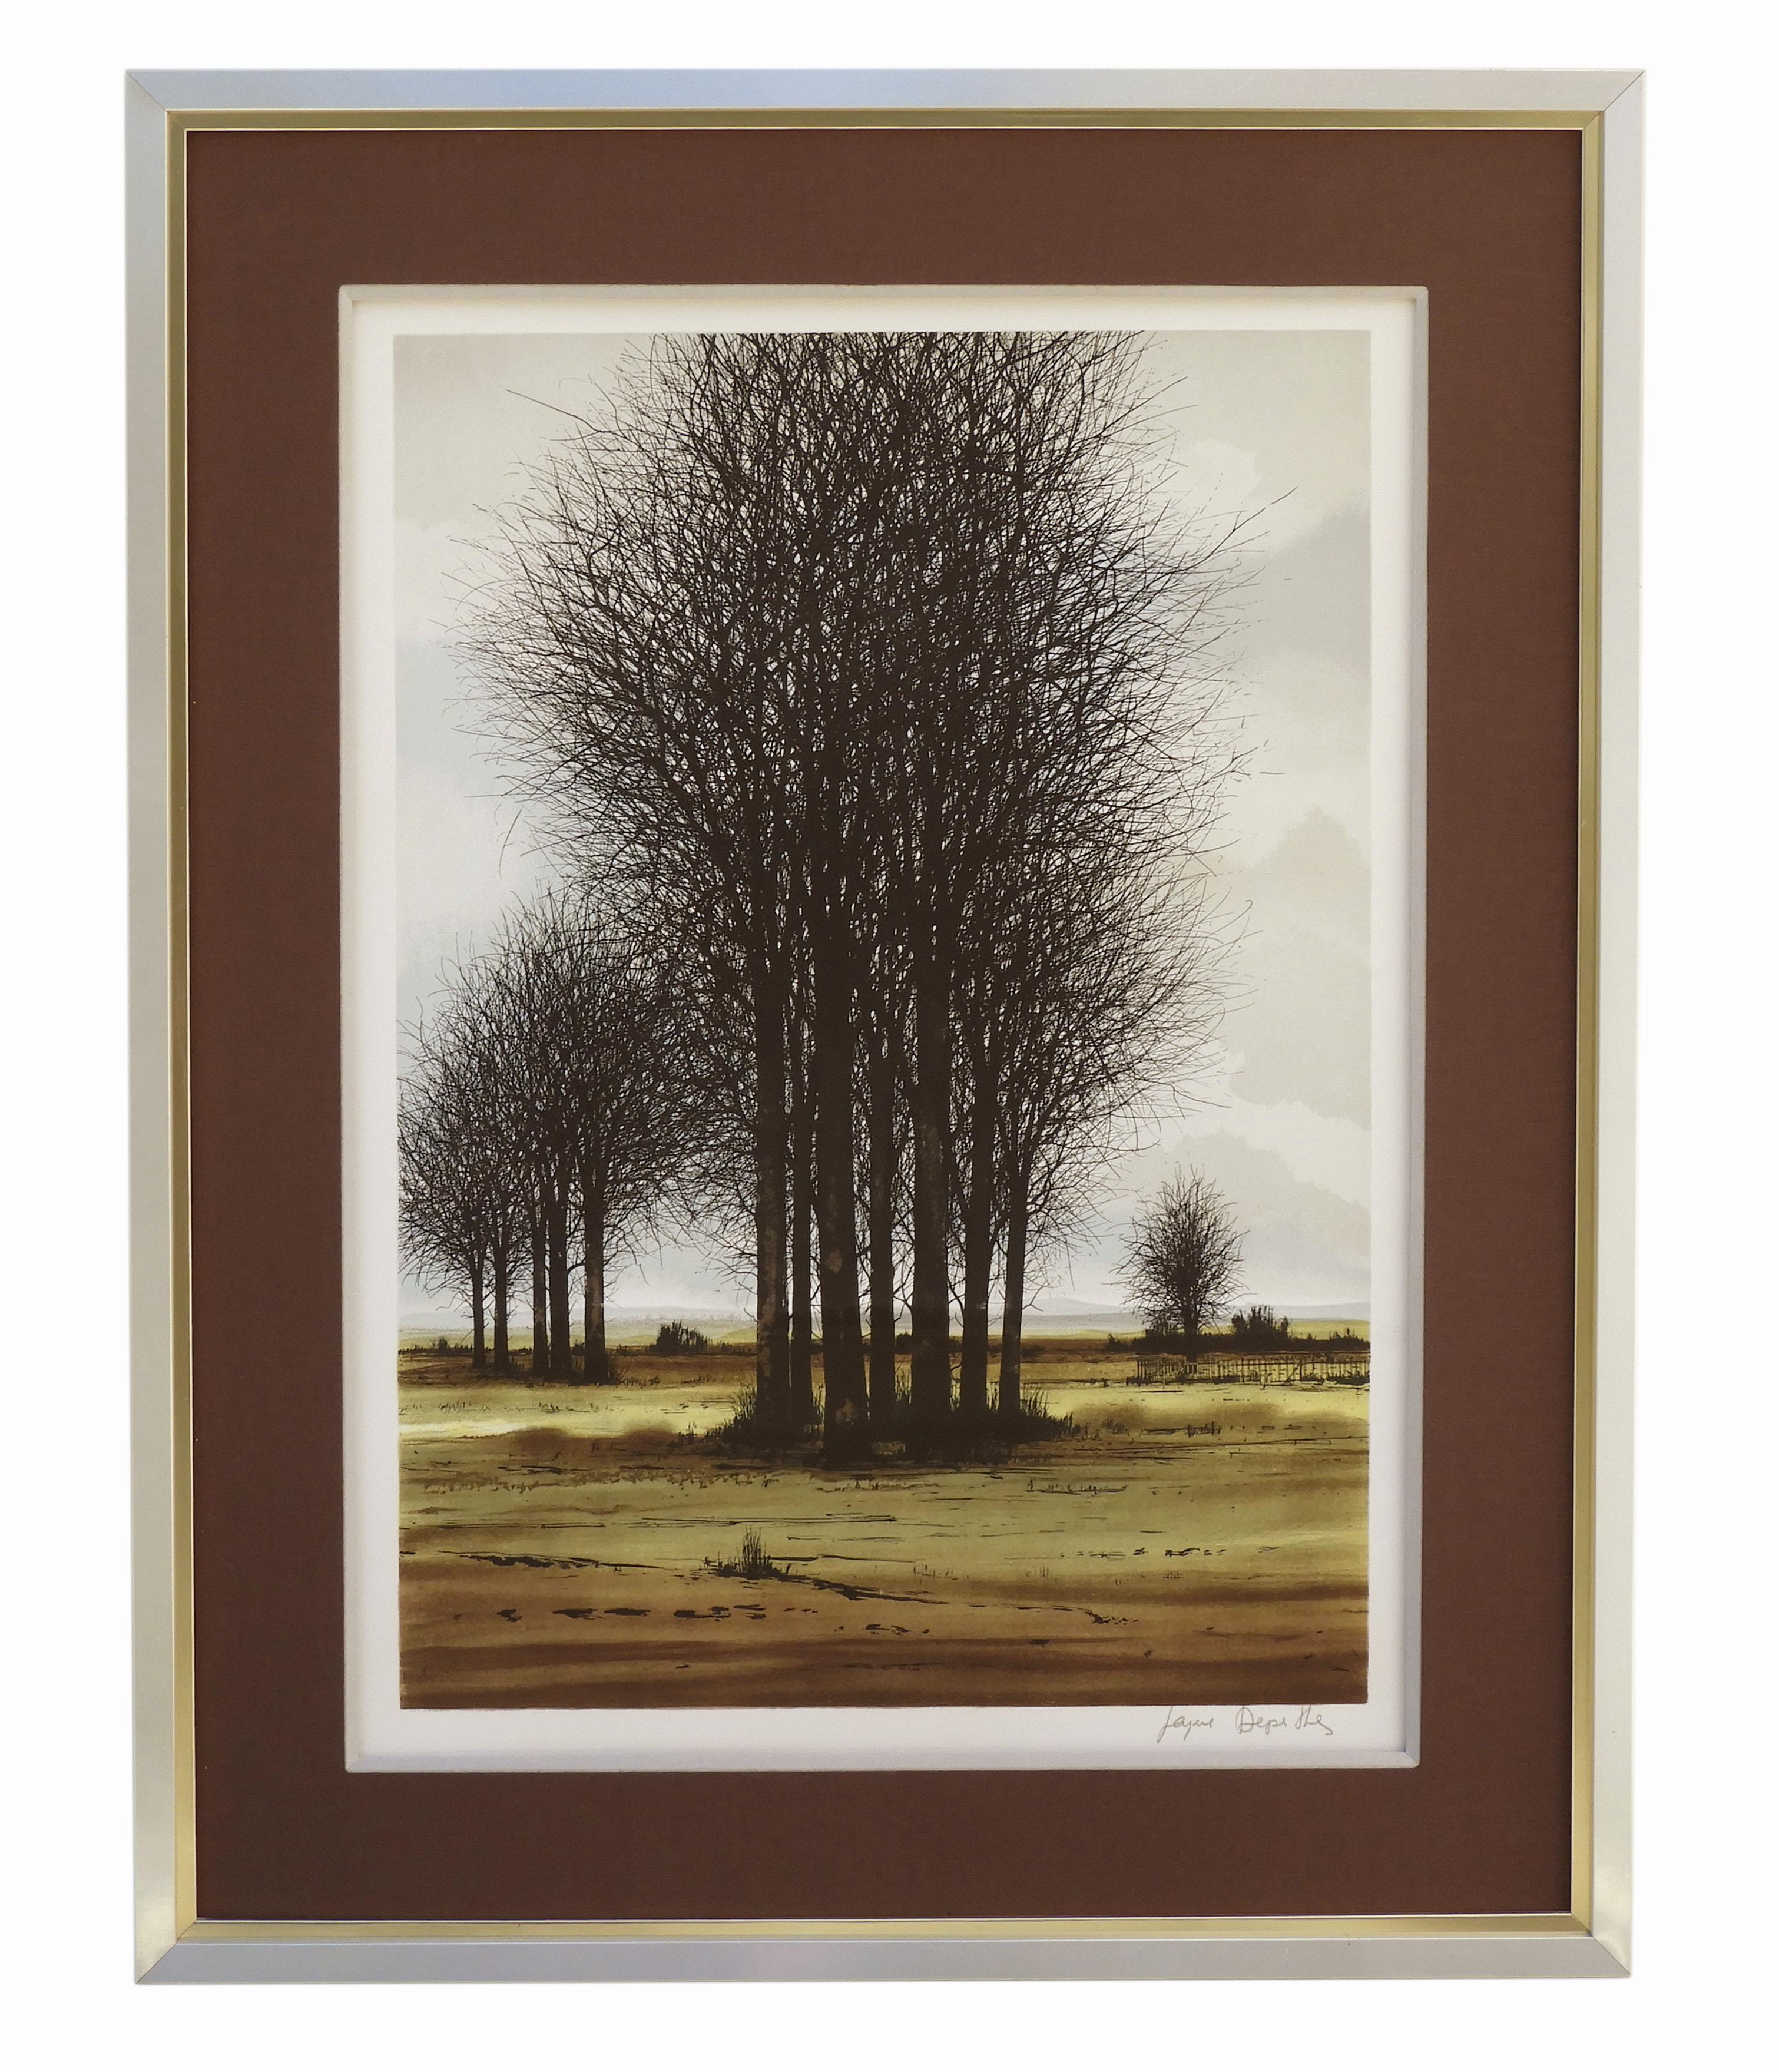 Mid-Century Modern ‘Mid Winter Landscape’ signed Lithograph, by Jacques Deperthes C1970 France For Sale